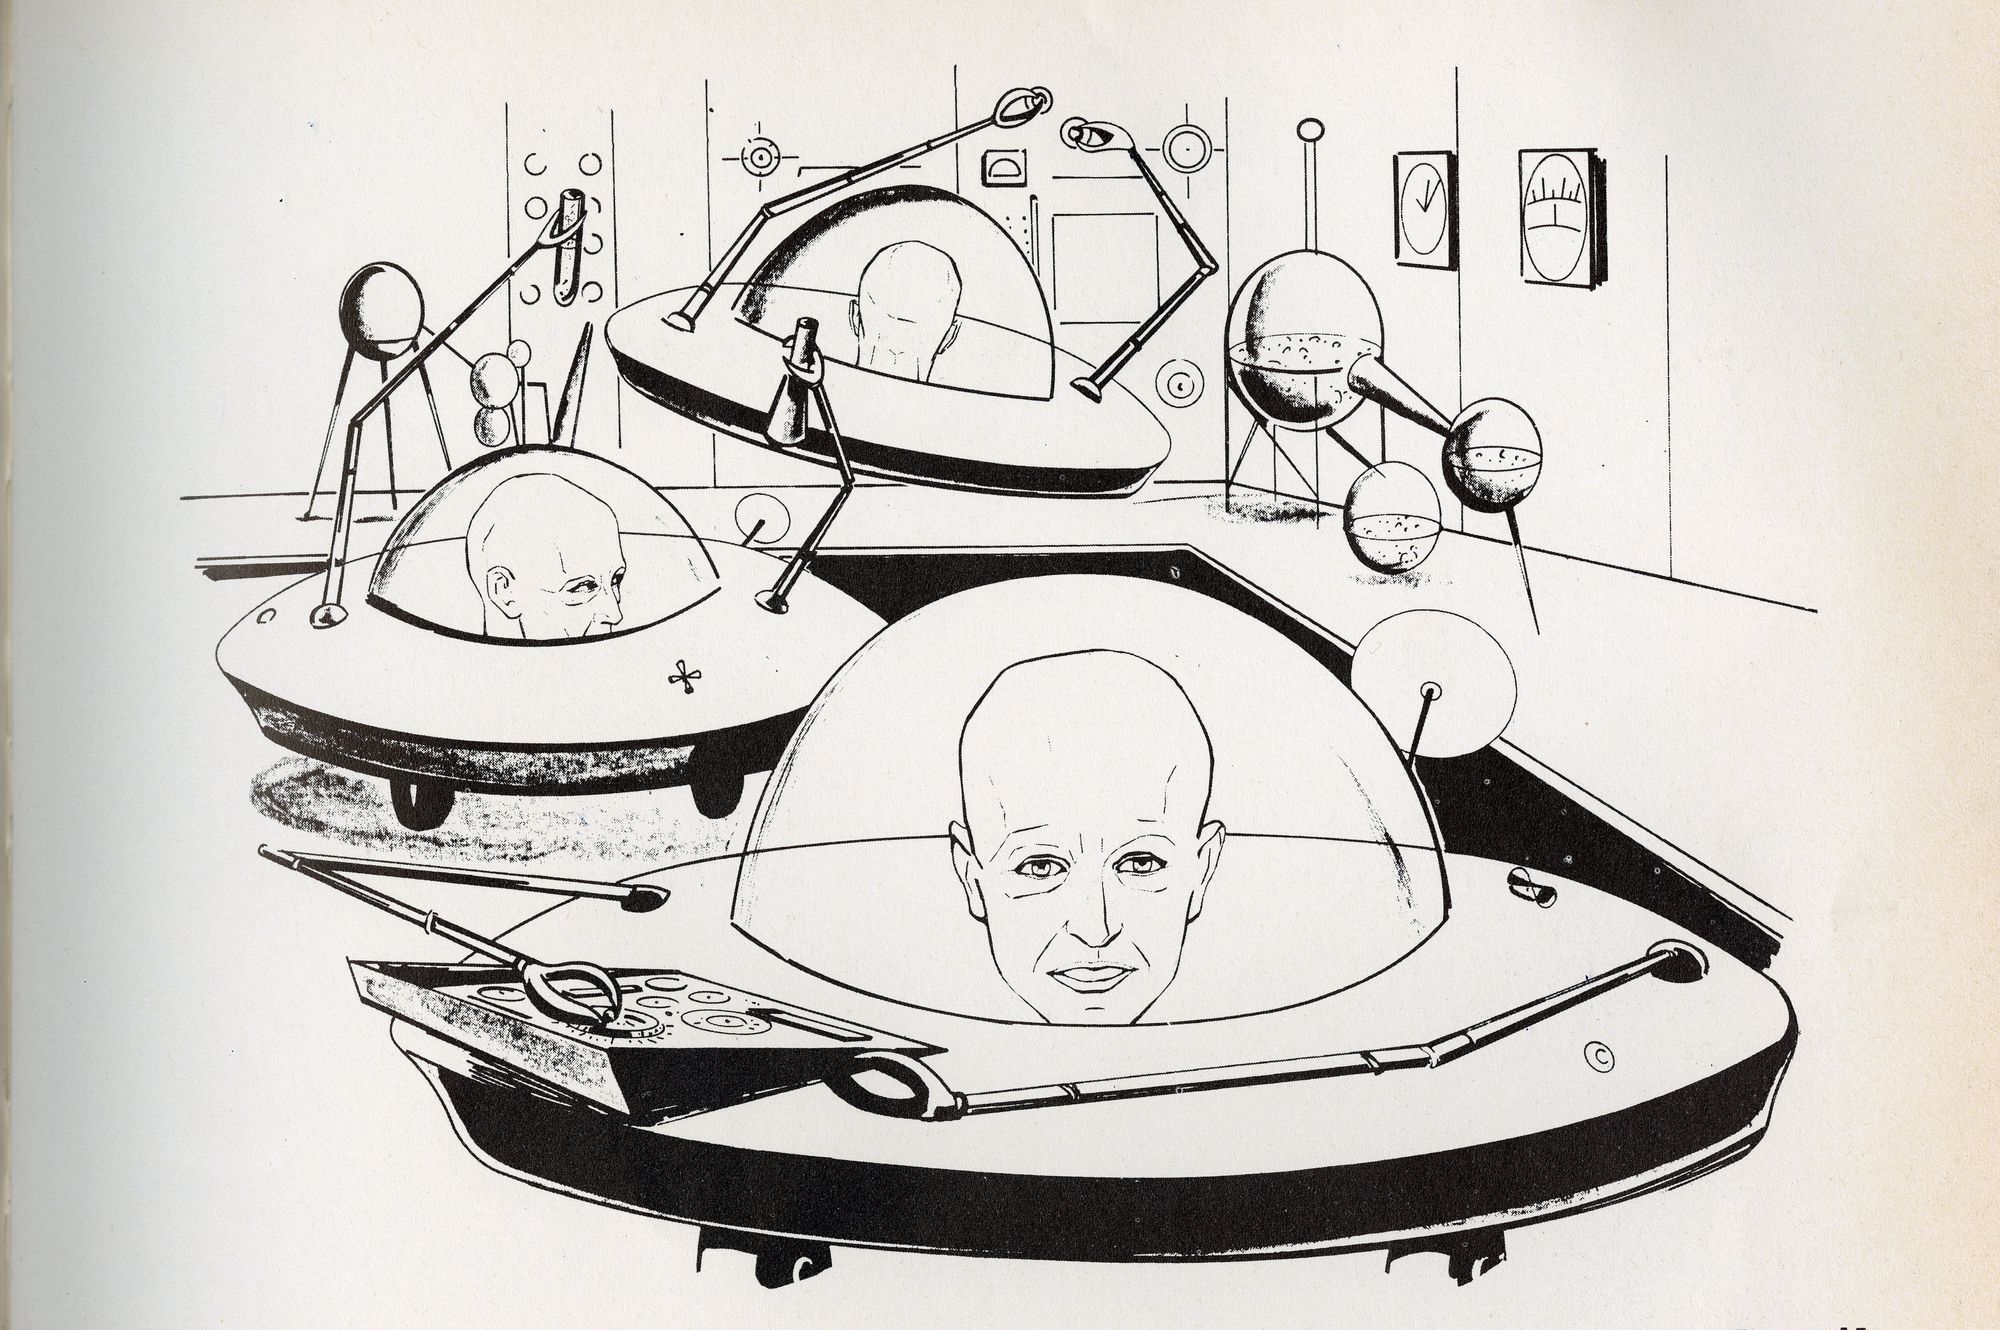 A black and white illustration of UFO-saucers with large human heads on the inside